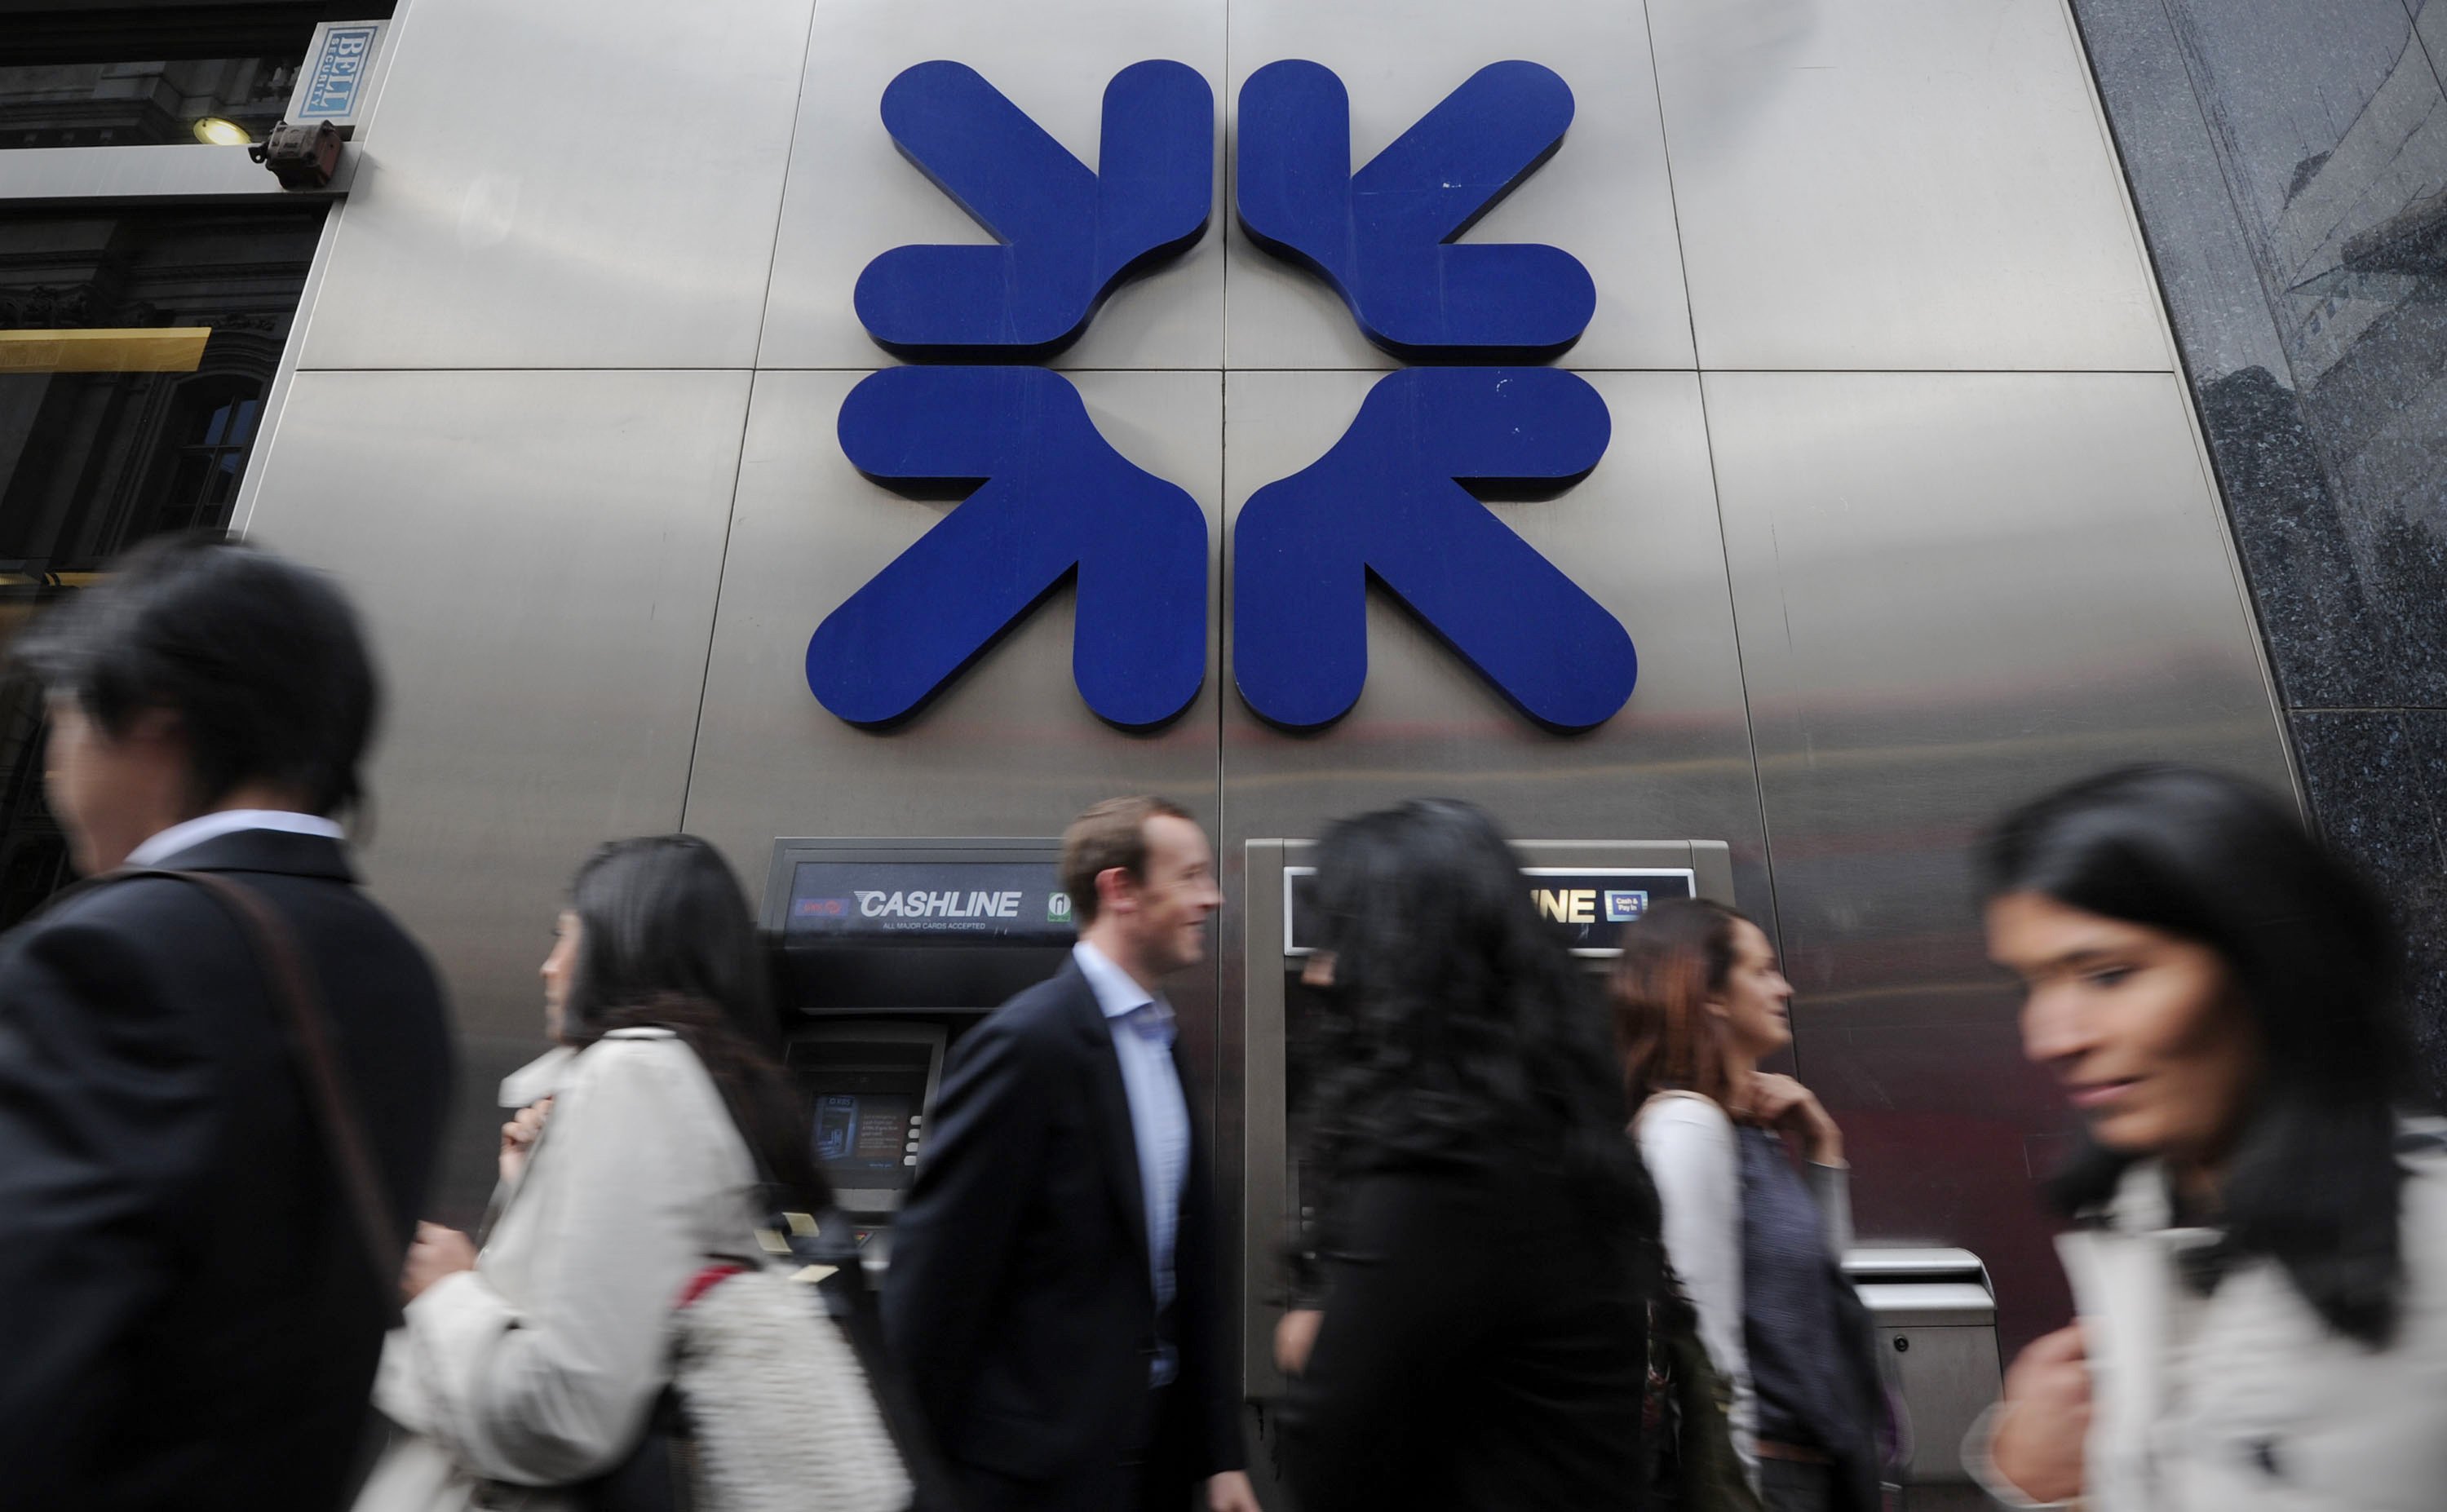 RBS is just the latest of several banks that have settled with the SEC over sales of risky mortgage securities that helped lead to the global financial crisis. Photo: AFP